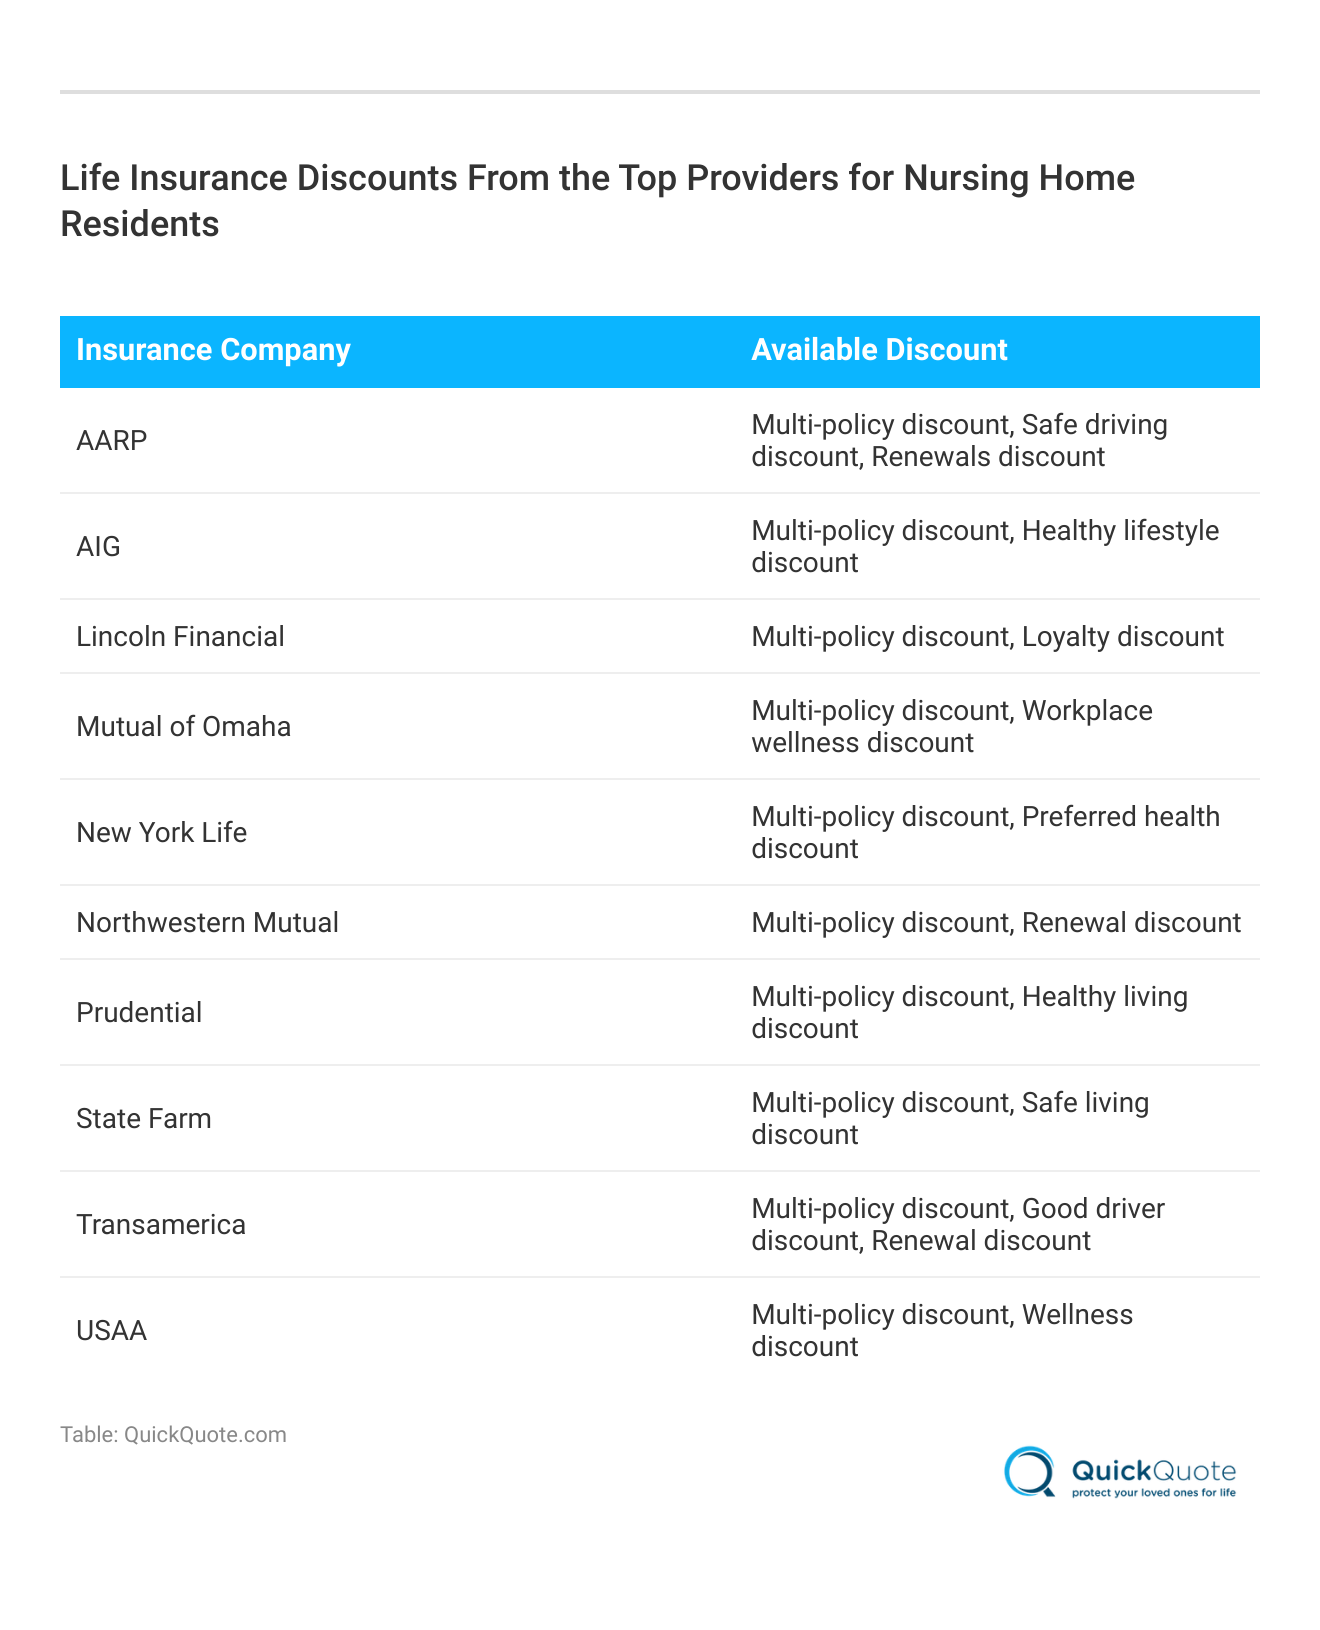 <h3>Life Insurance Discounts From the Top Providers for Nursing Home Residents</h3>